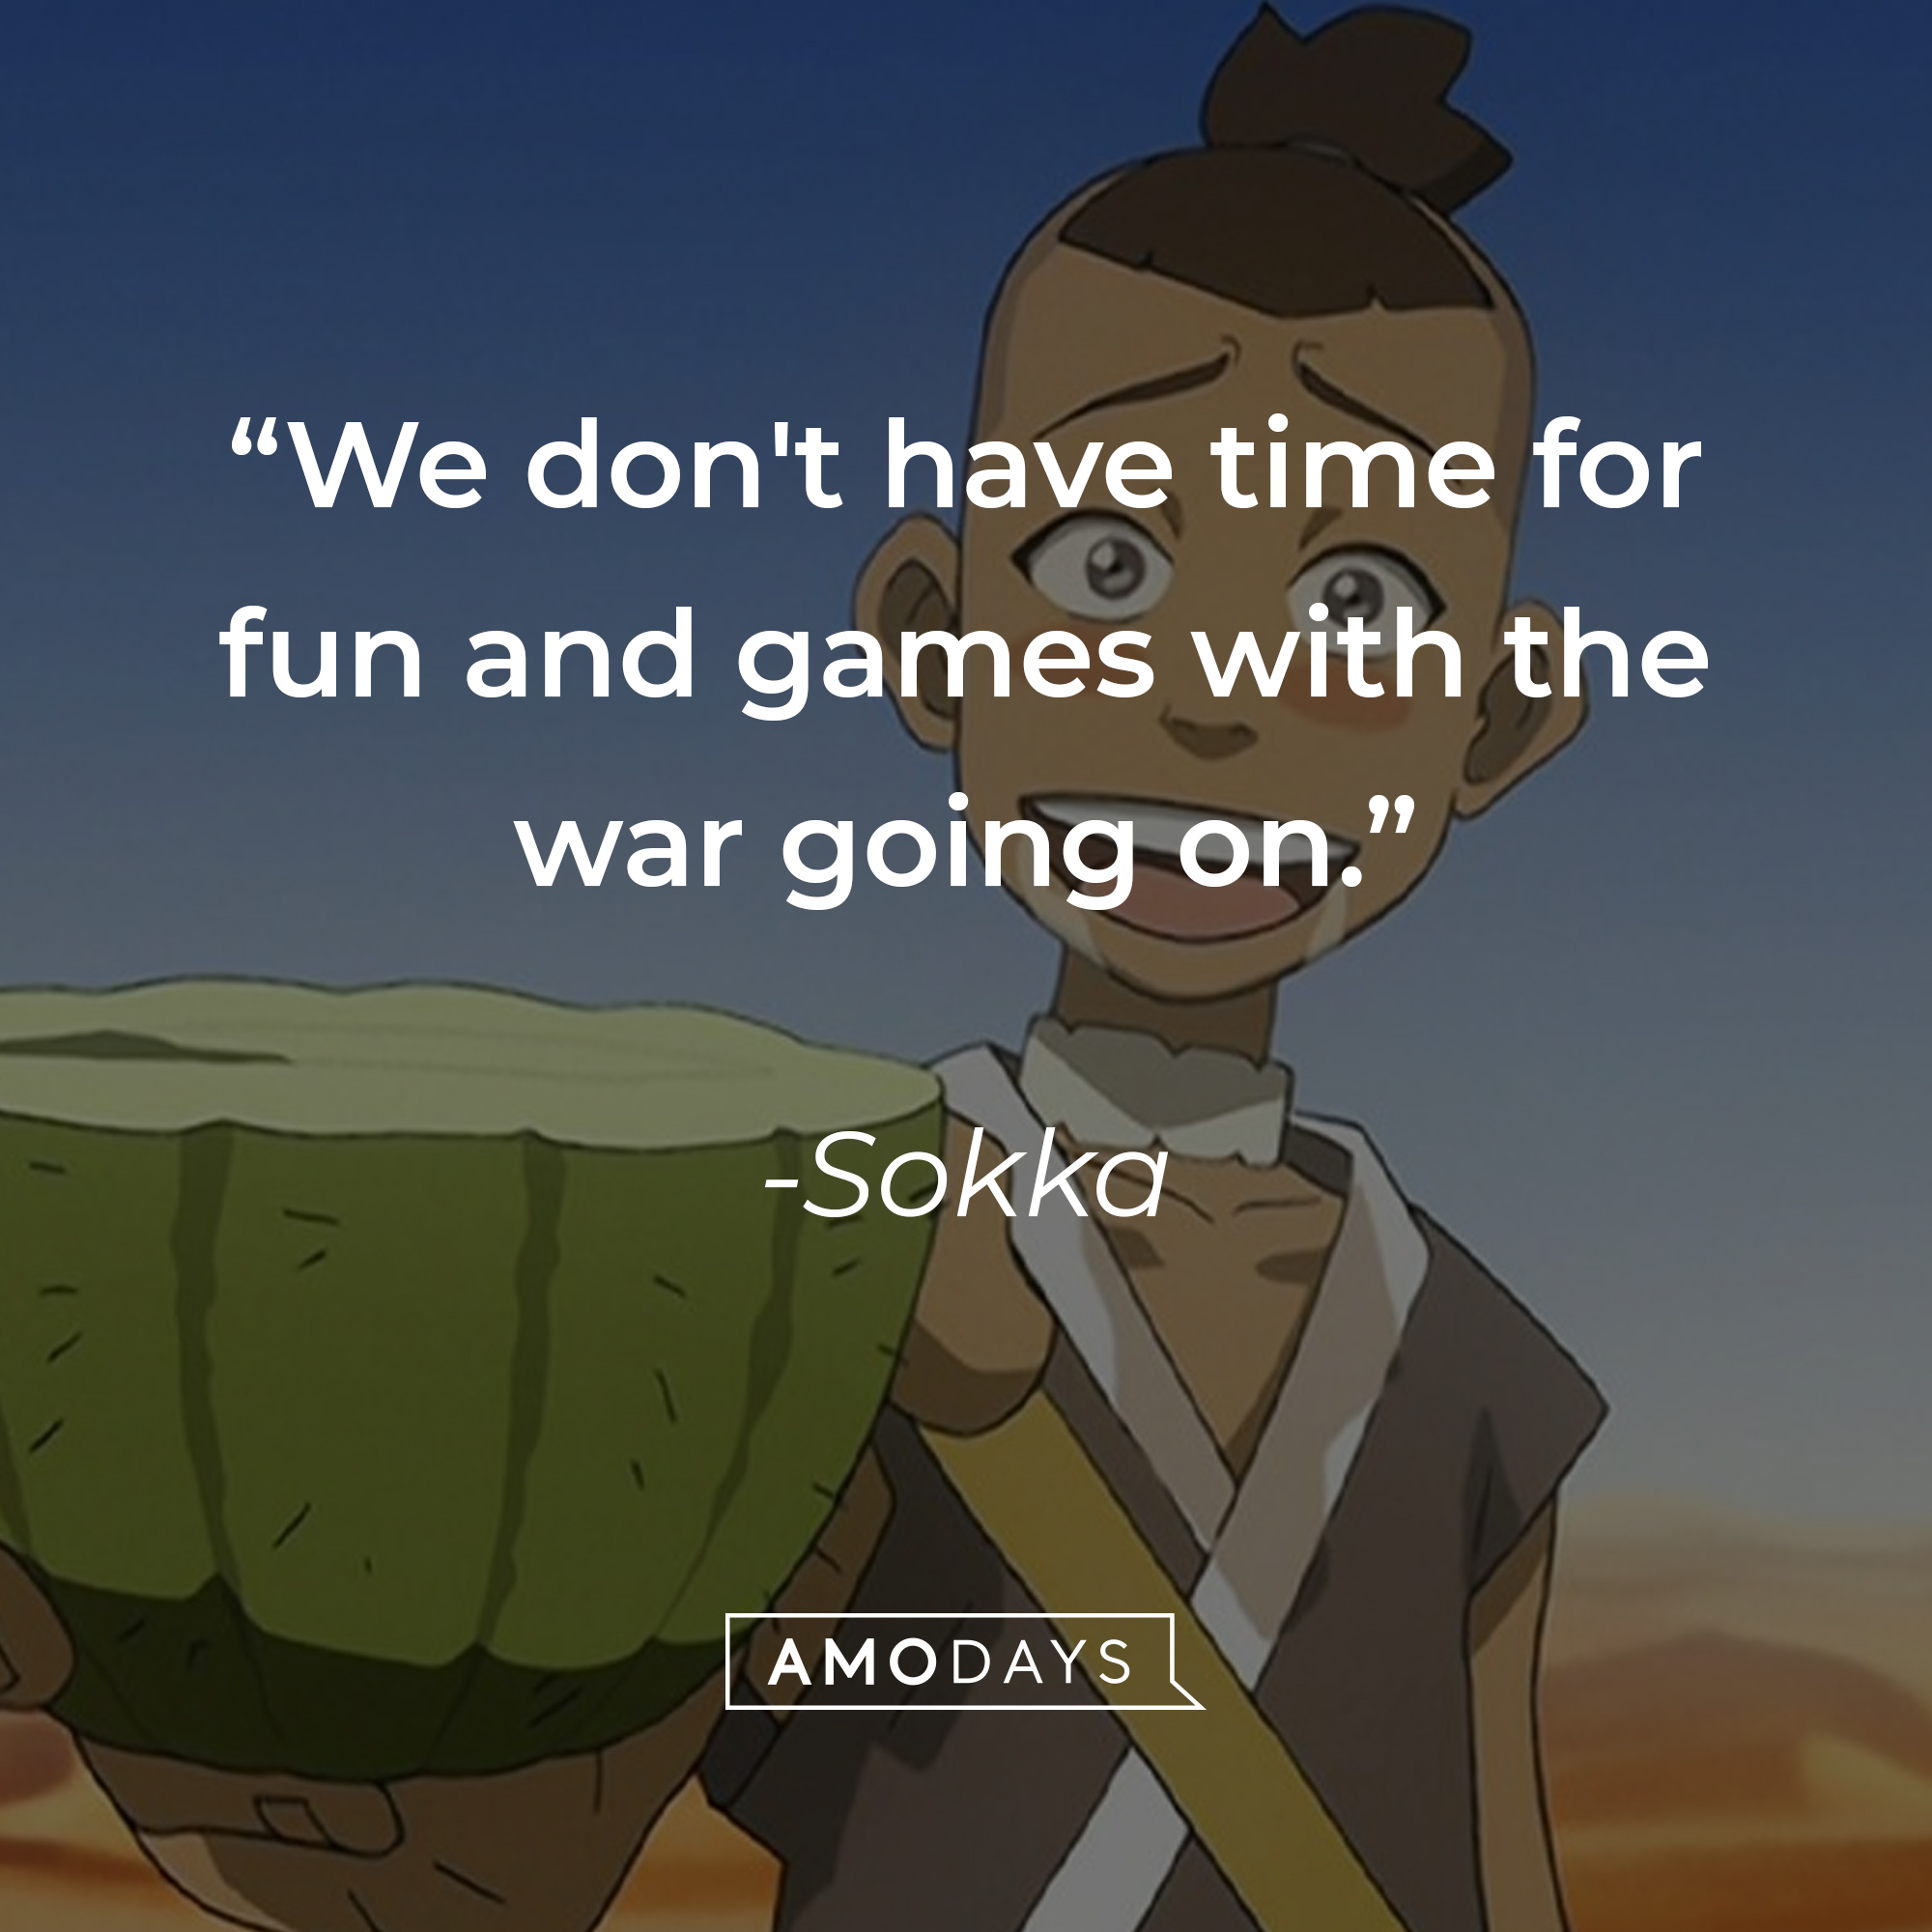 Sokka's quote: "We don't have time for fun and games with the war going on." | Source: facebook.com/avatarthelastairbender